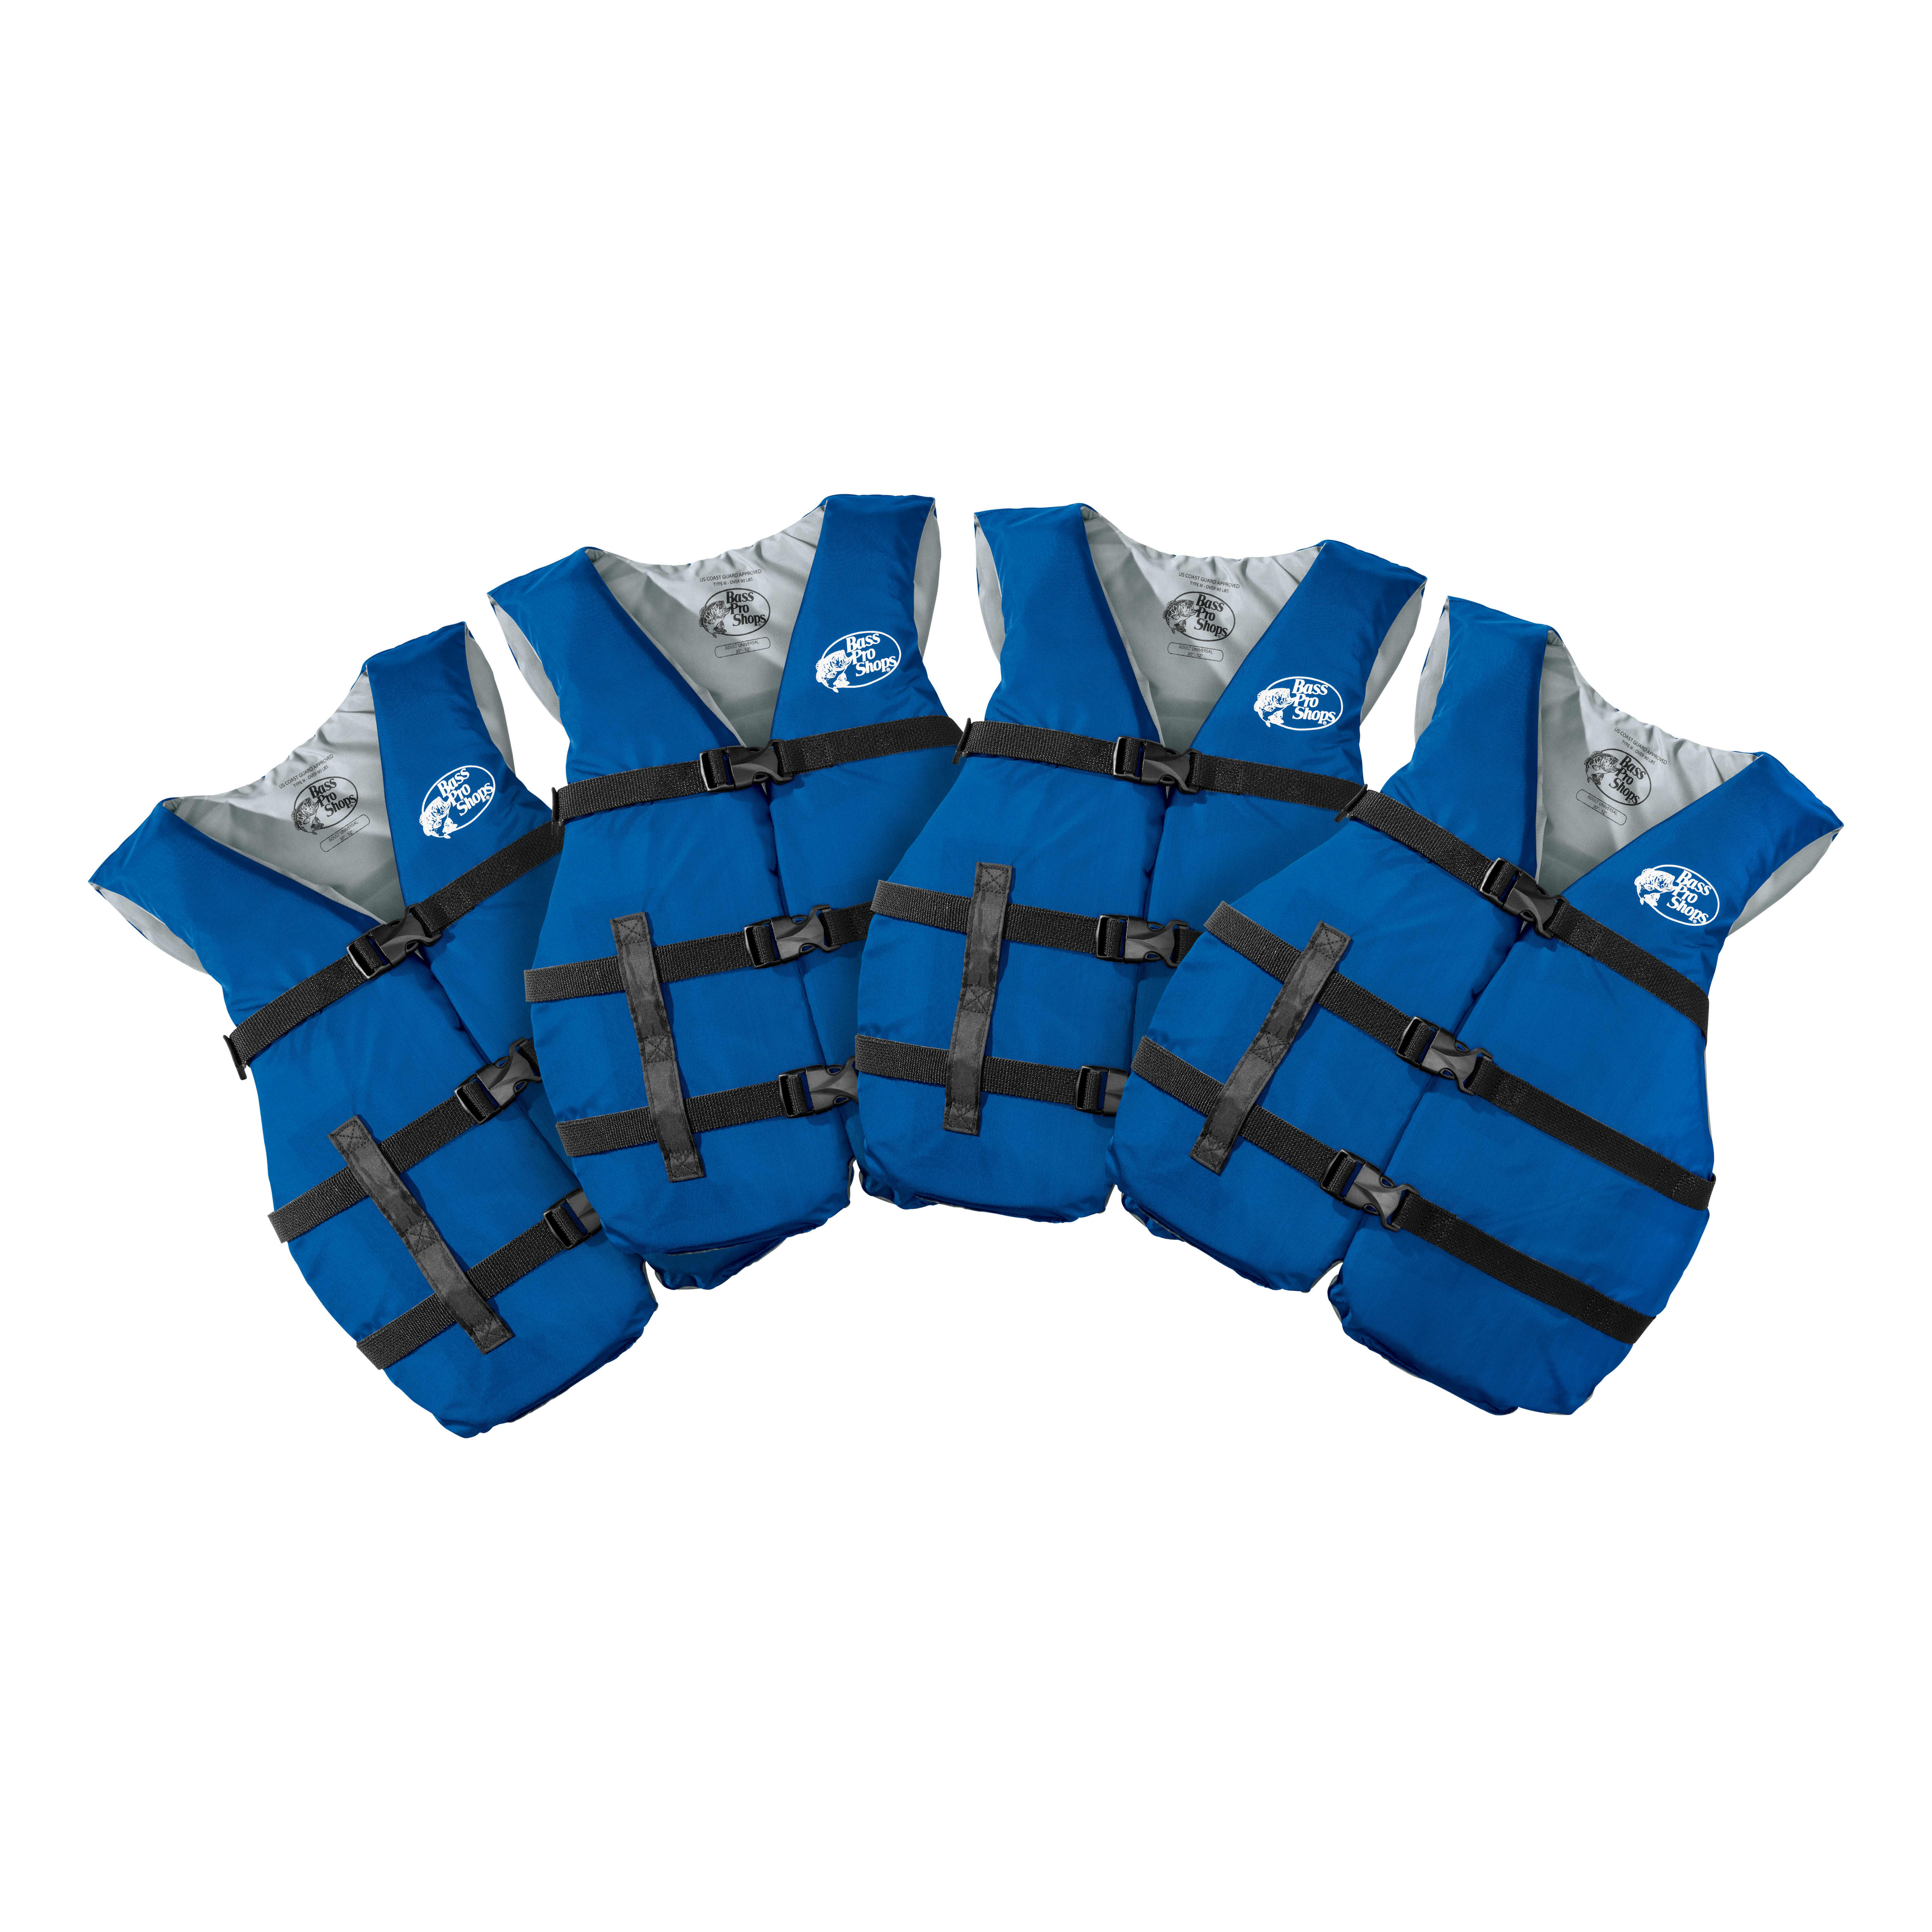 Bass Pro Shops® Adult Universal Life Vest - 4-Pack - 4 Pack View